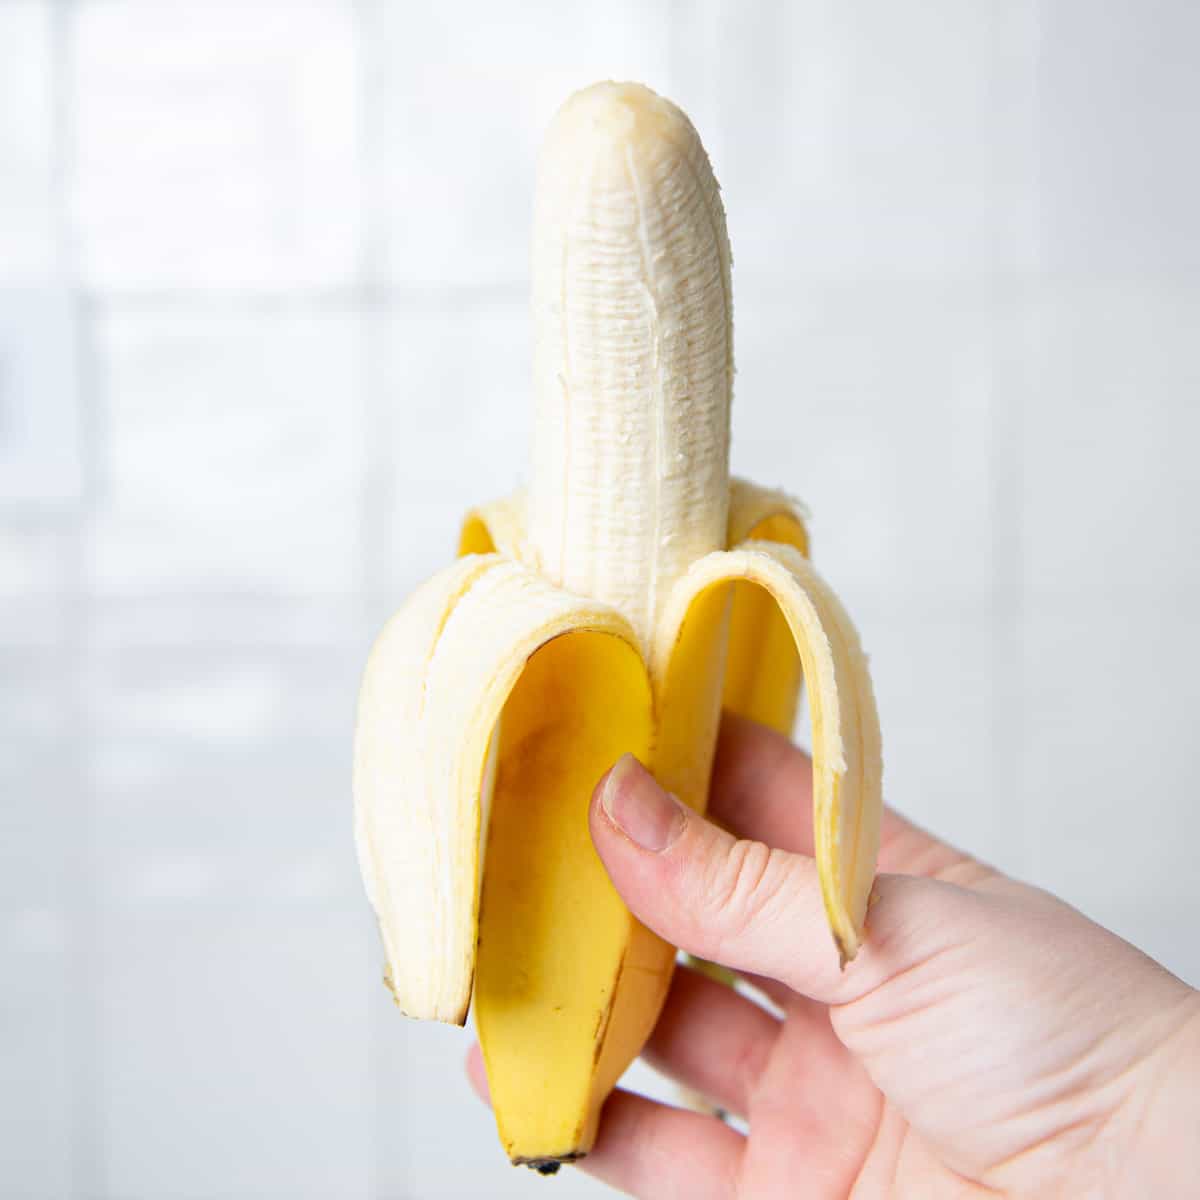 A peeled banana is being held by a hand.